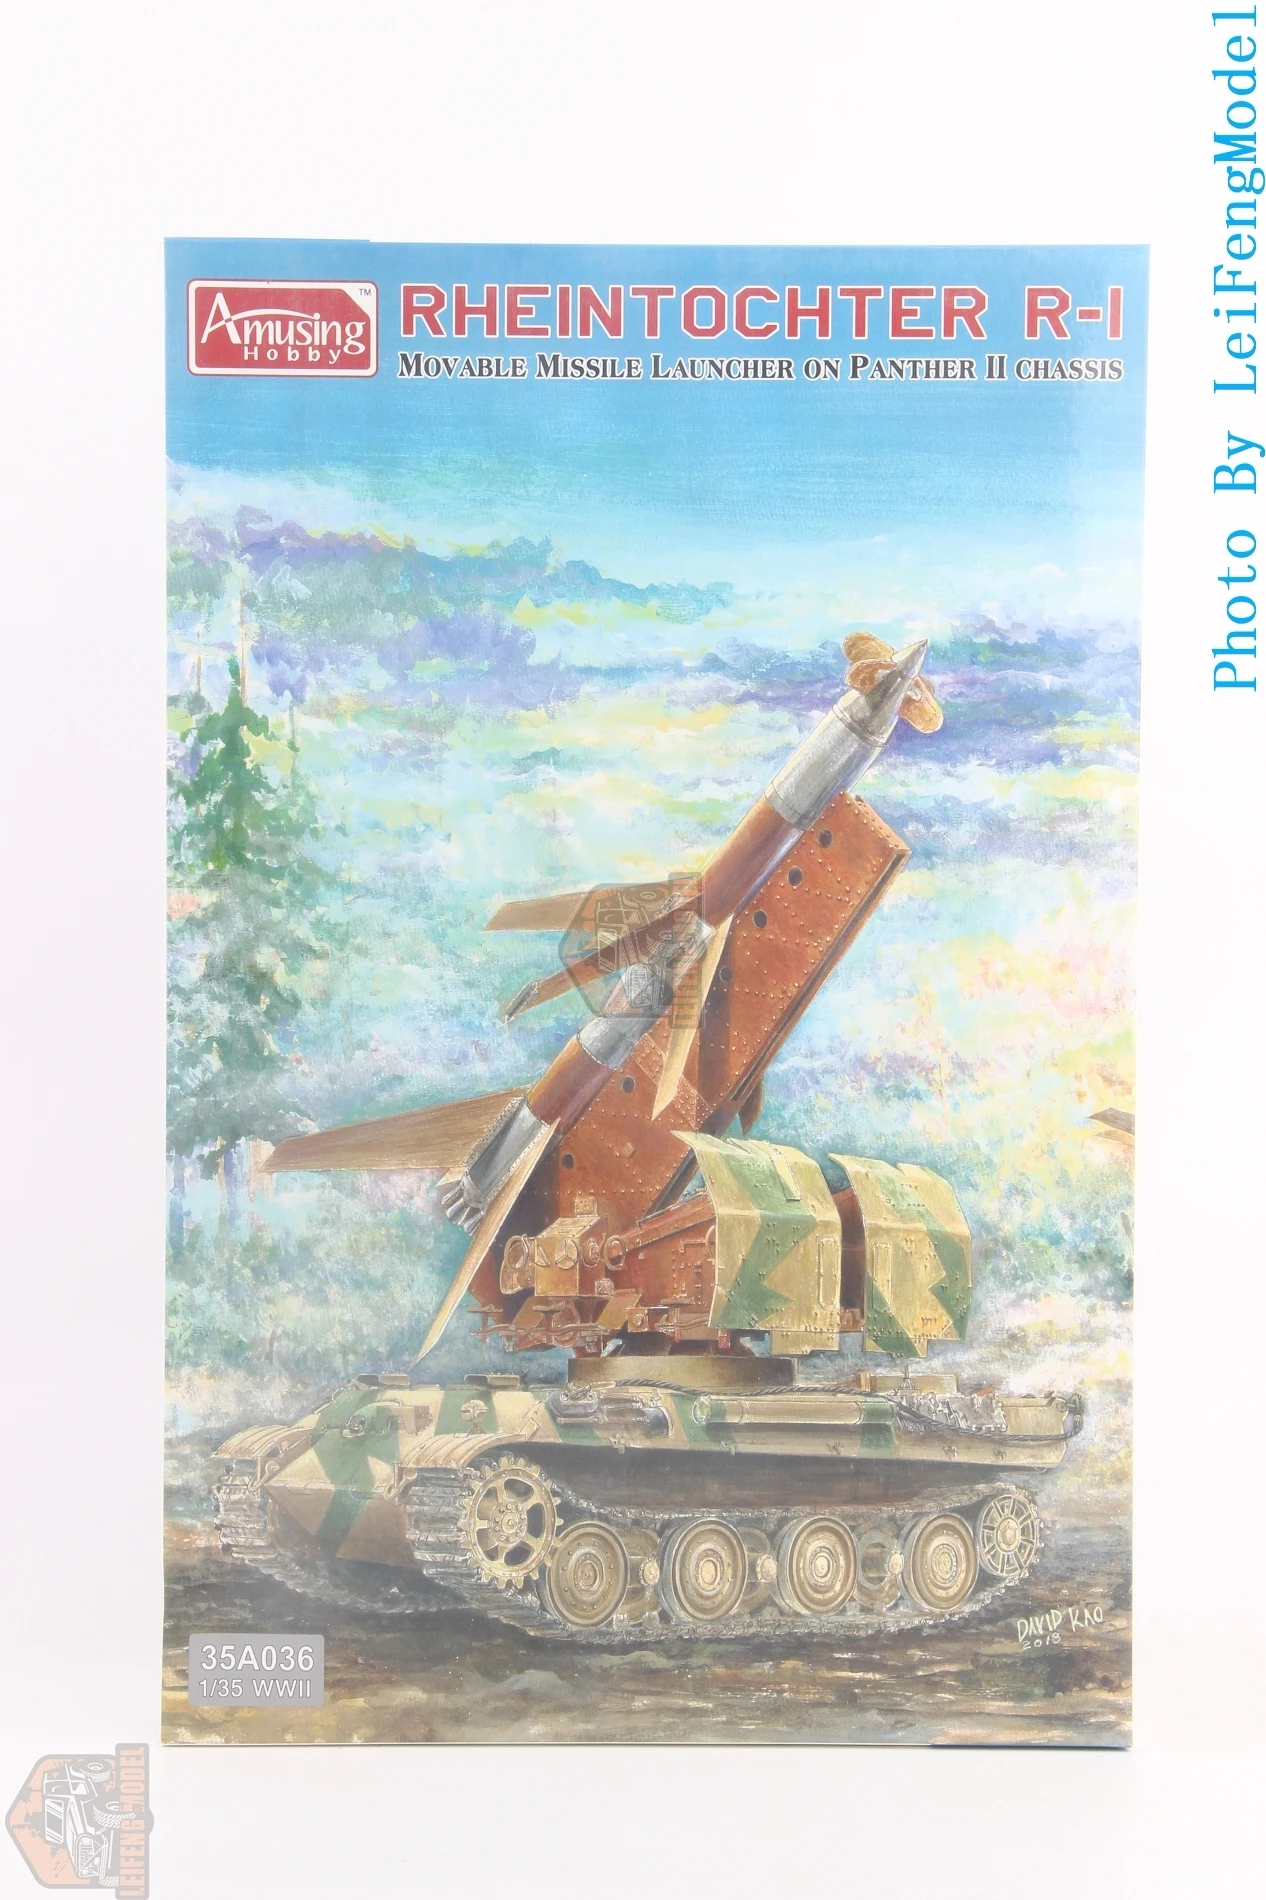 

Amusing Hobby 35A036 1/35 Rheintochter R1 Missile Launcher on Panther II Chassis Model Kit